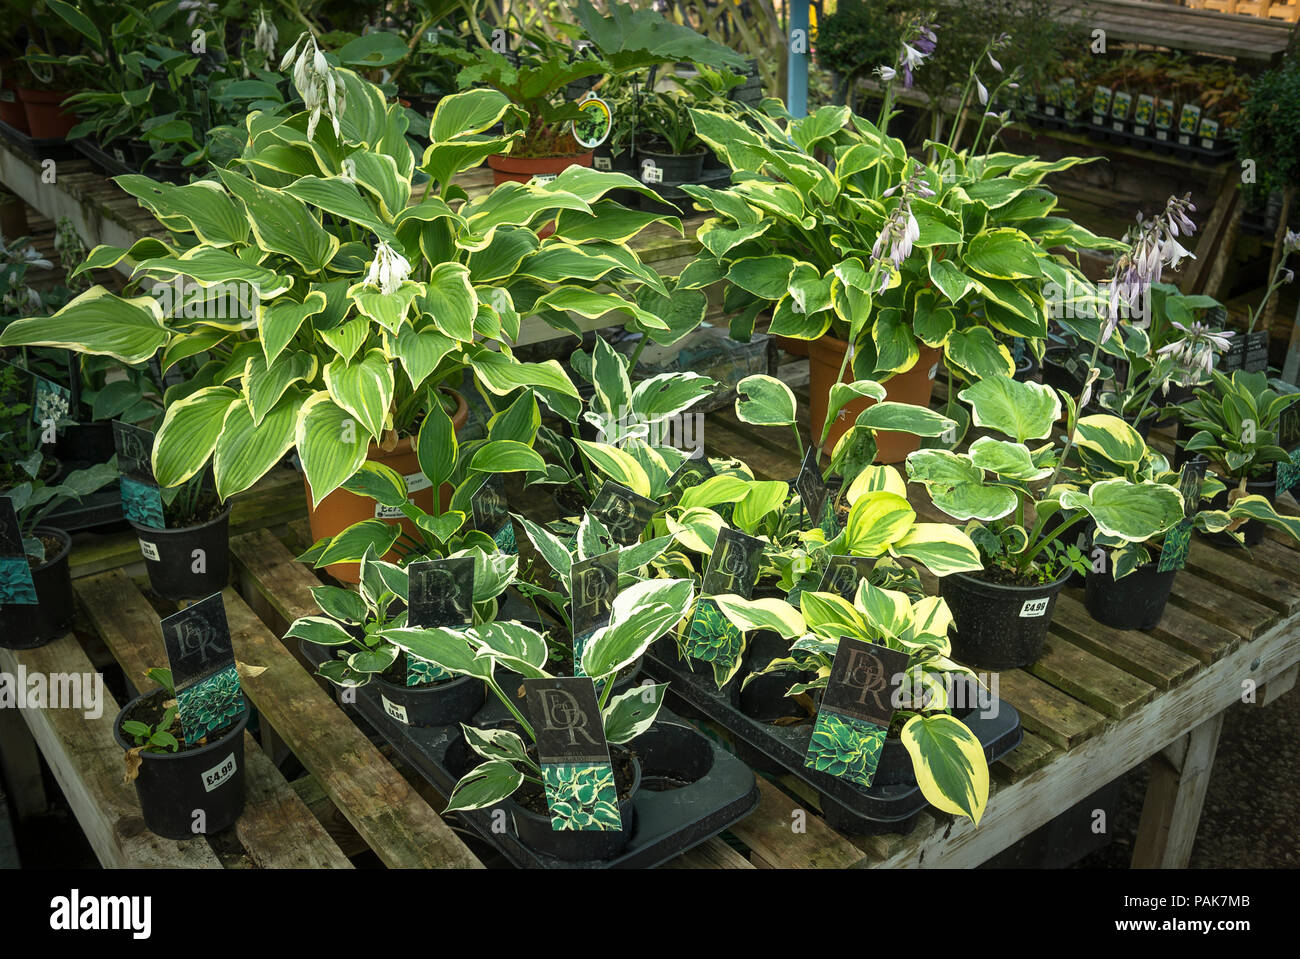 A selection of hosta plants for sale in an English garden centre in July Stock Photo